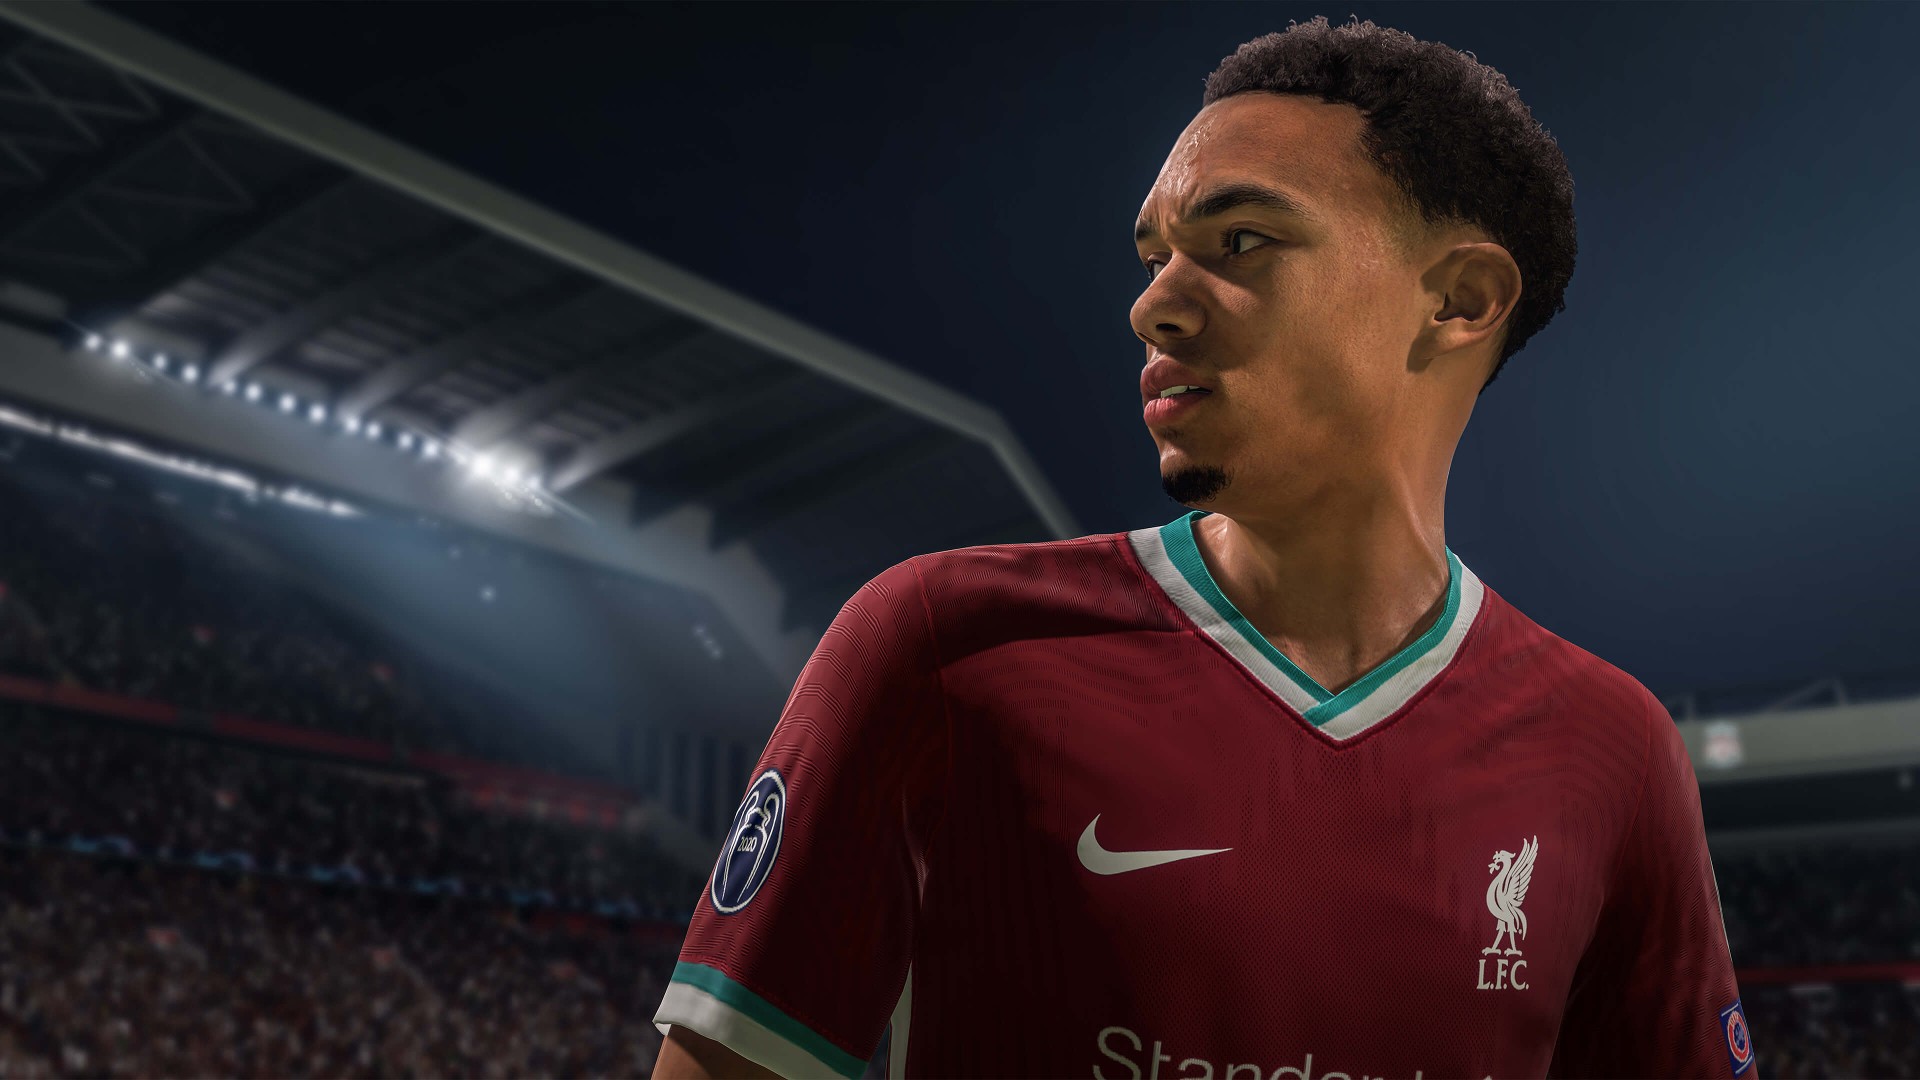 Find the best laptops for FIFA 21